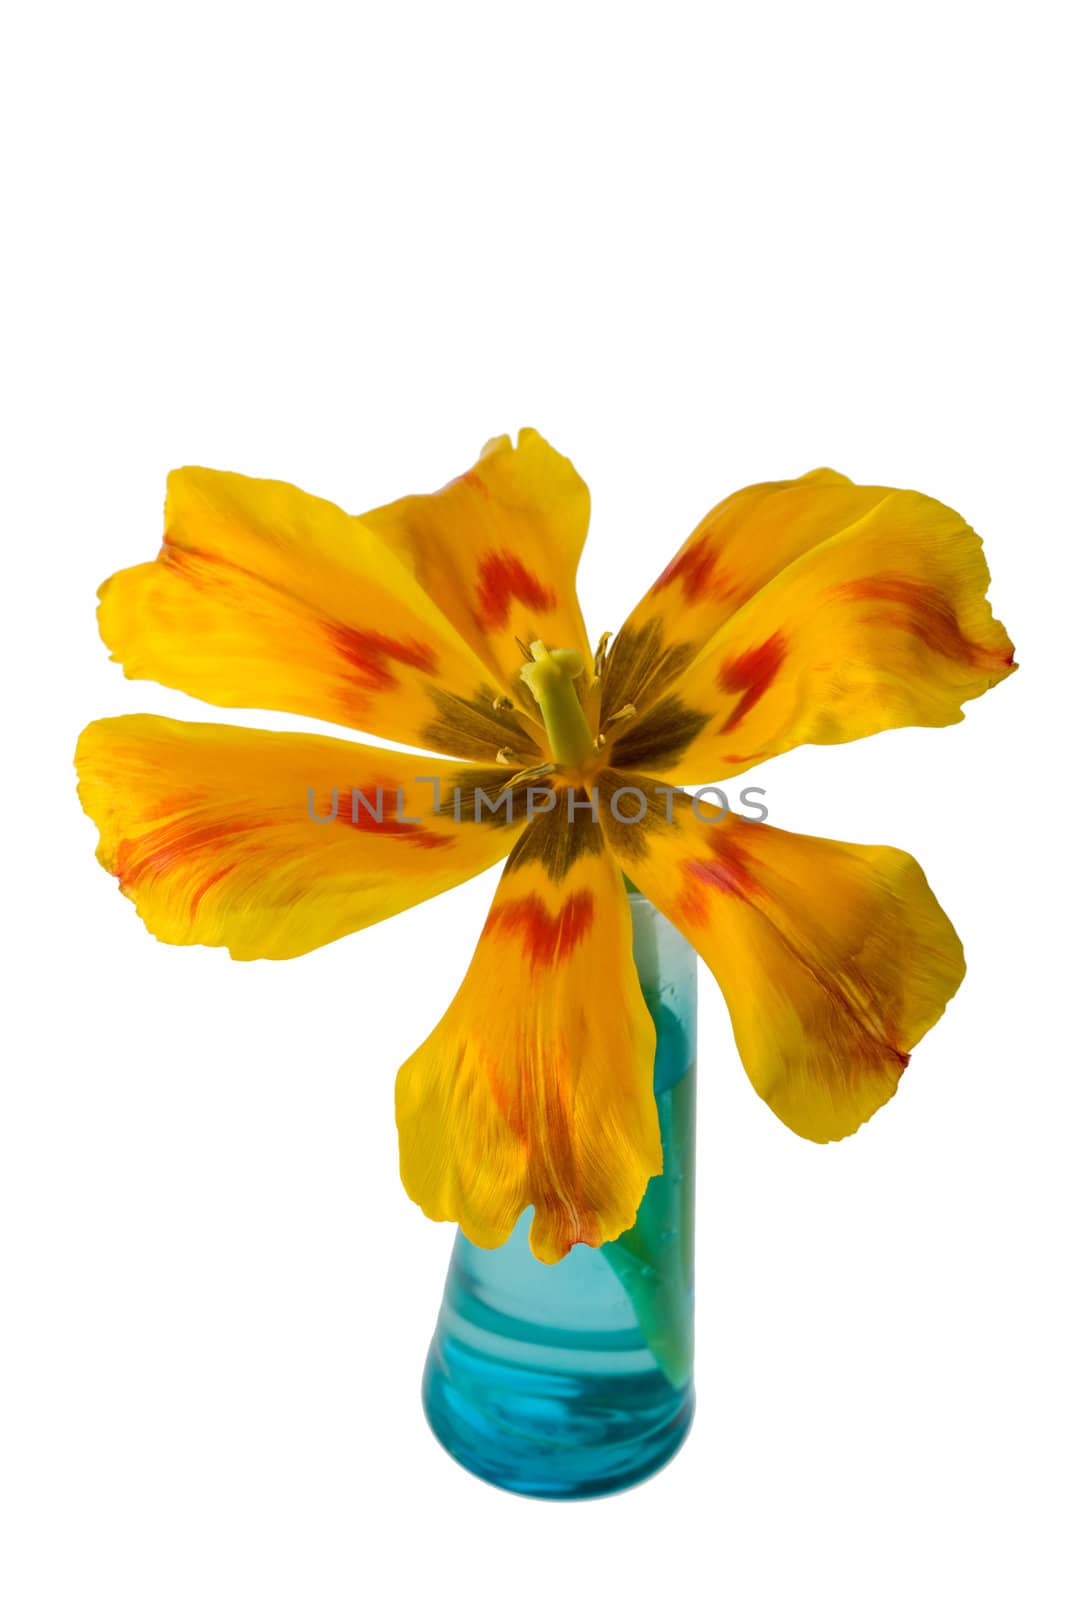 detail of a orange tulip isolated on white